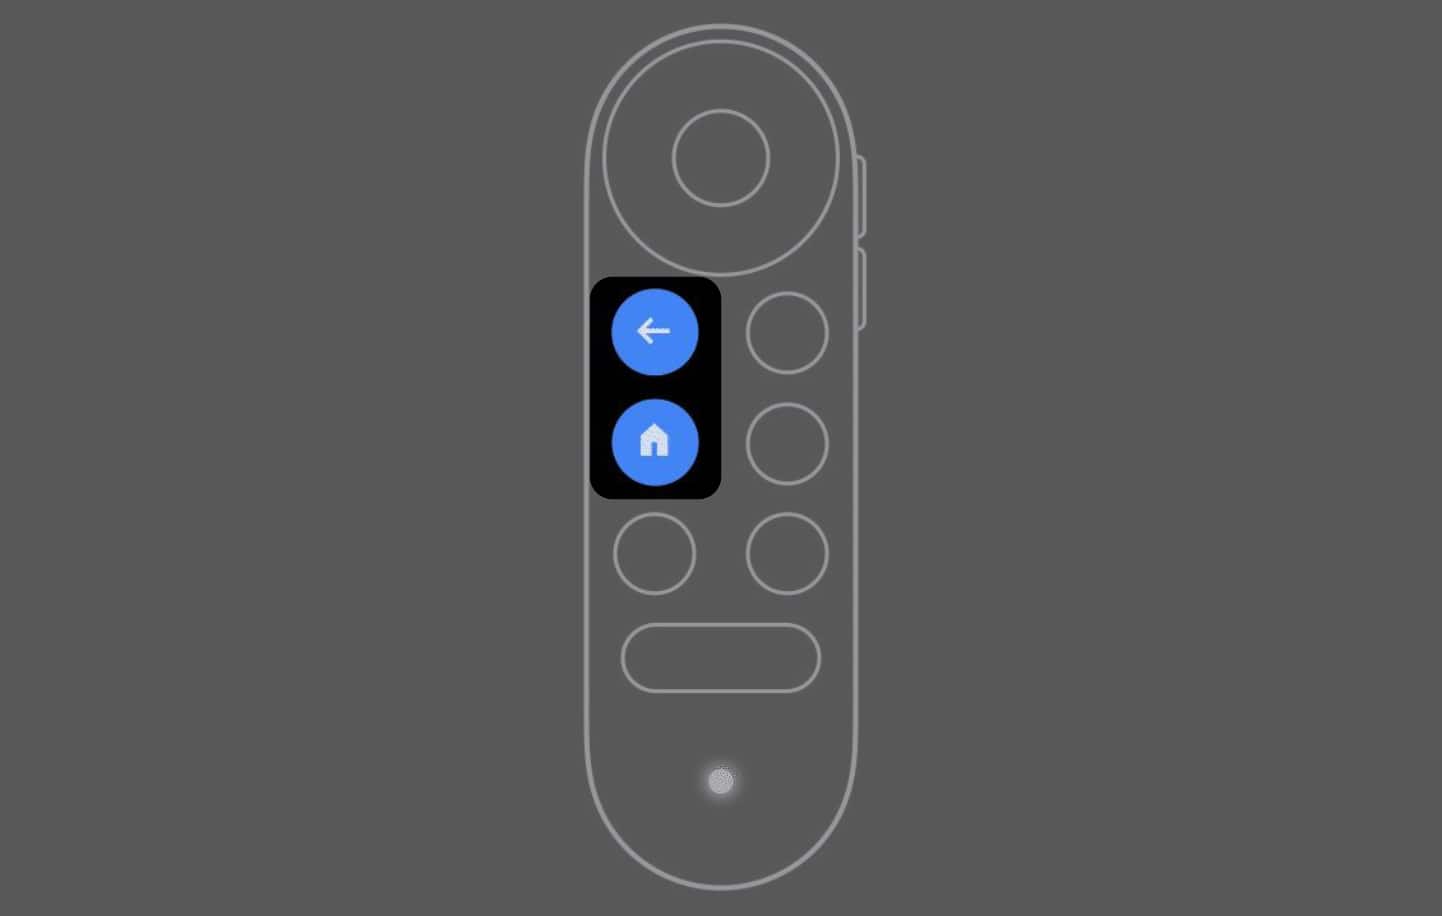 Select Back and Home button on your Google TV remote